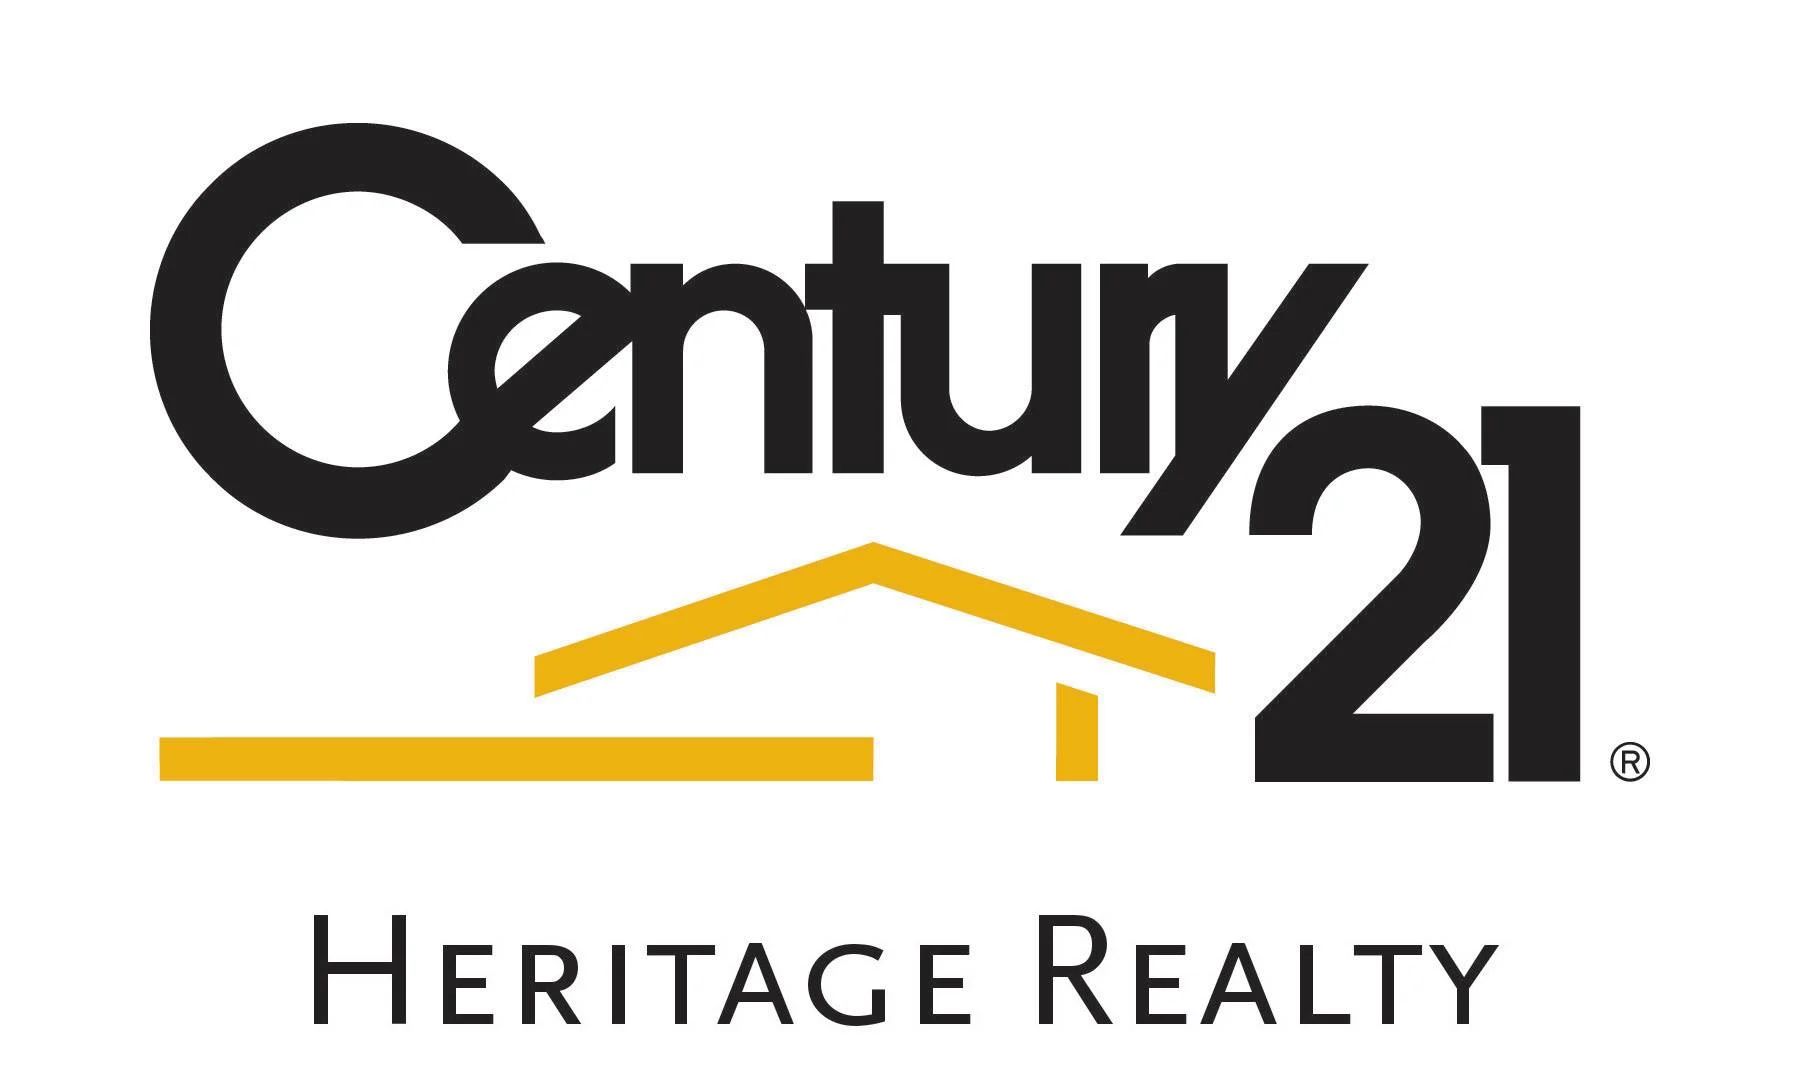 heritage realty